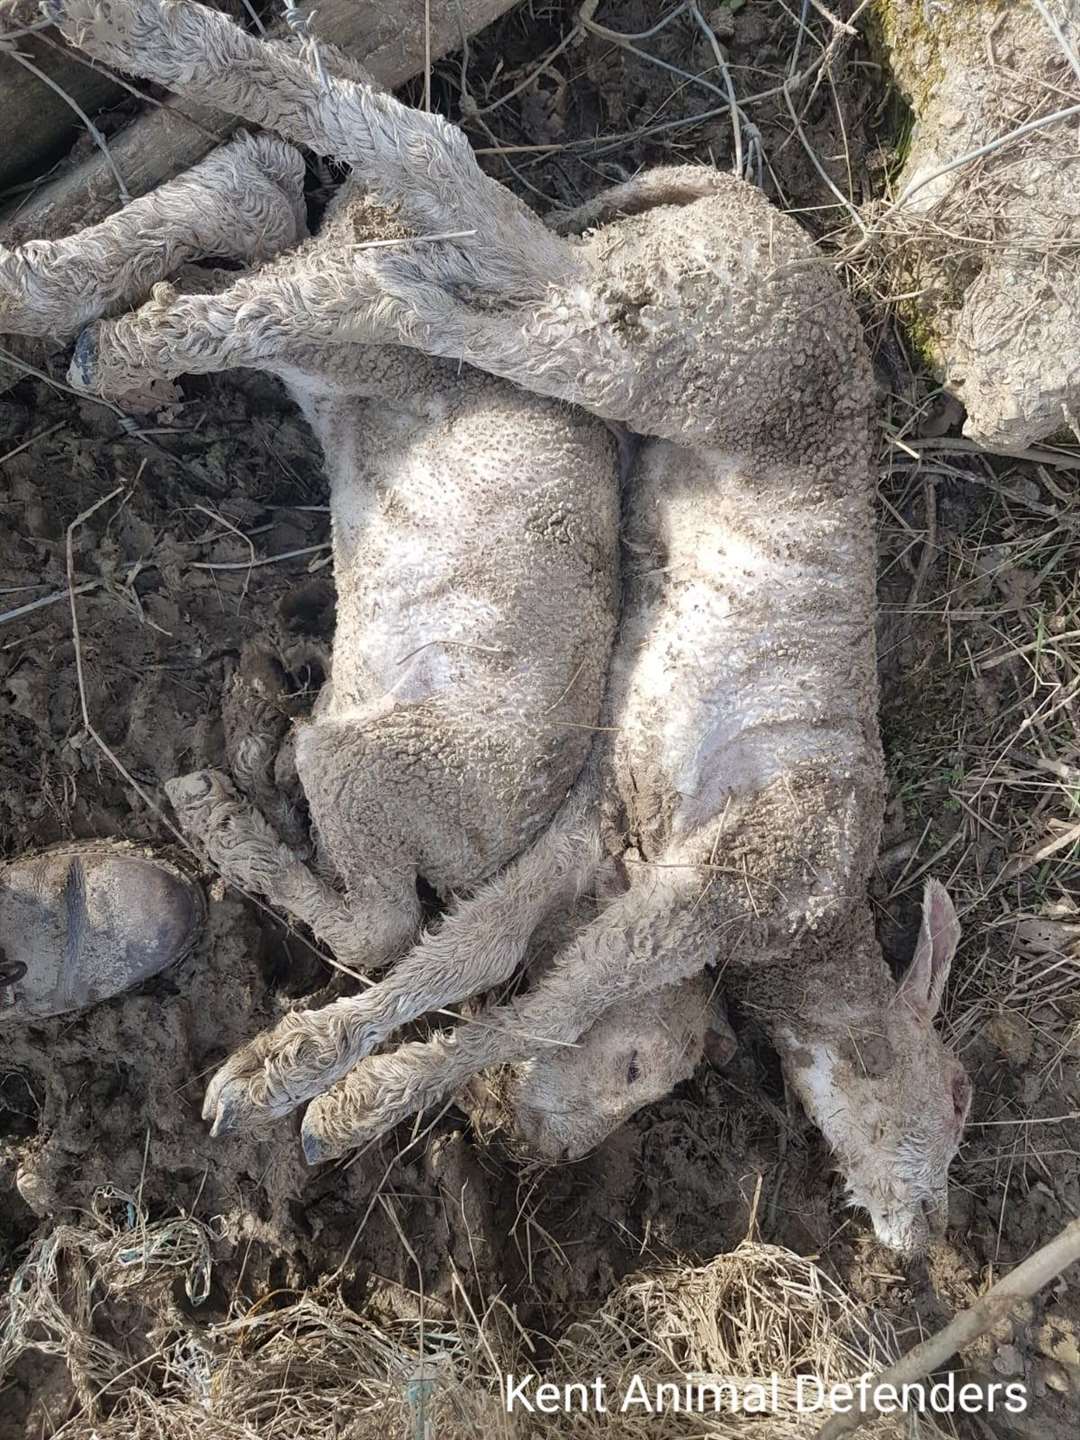 Two lambs found dead by Kent Animal Defenders